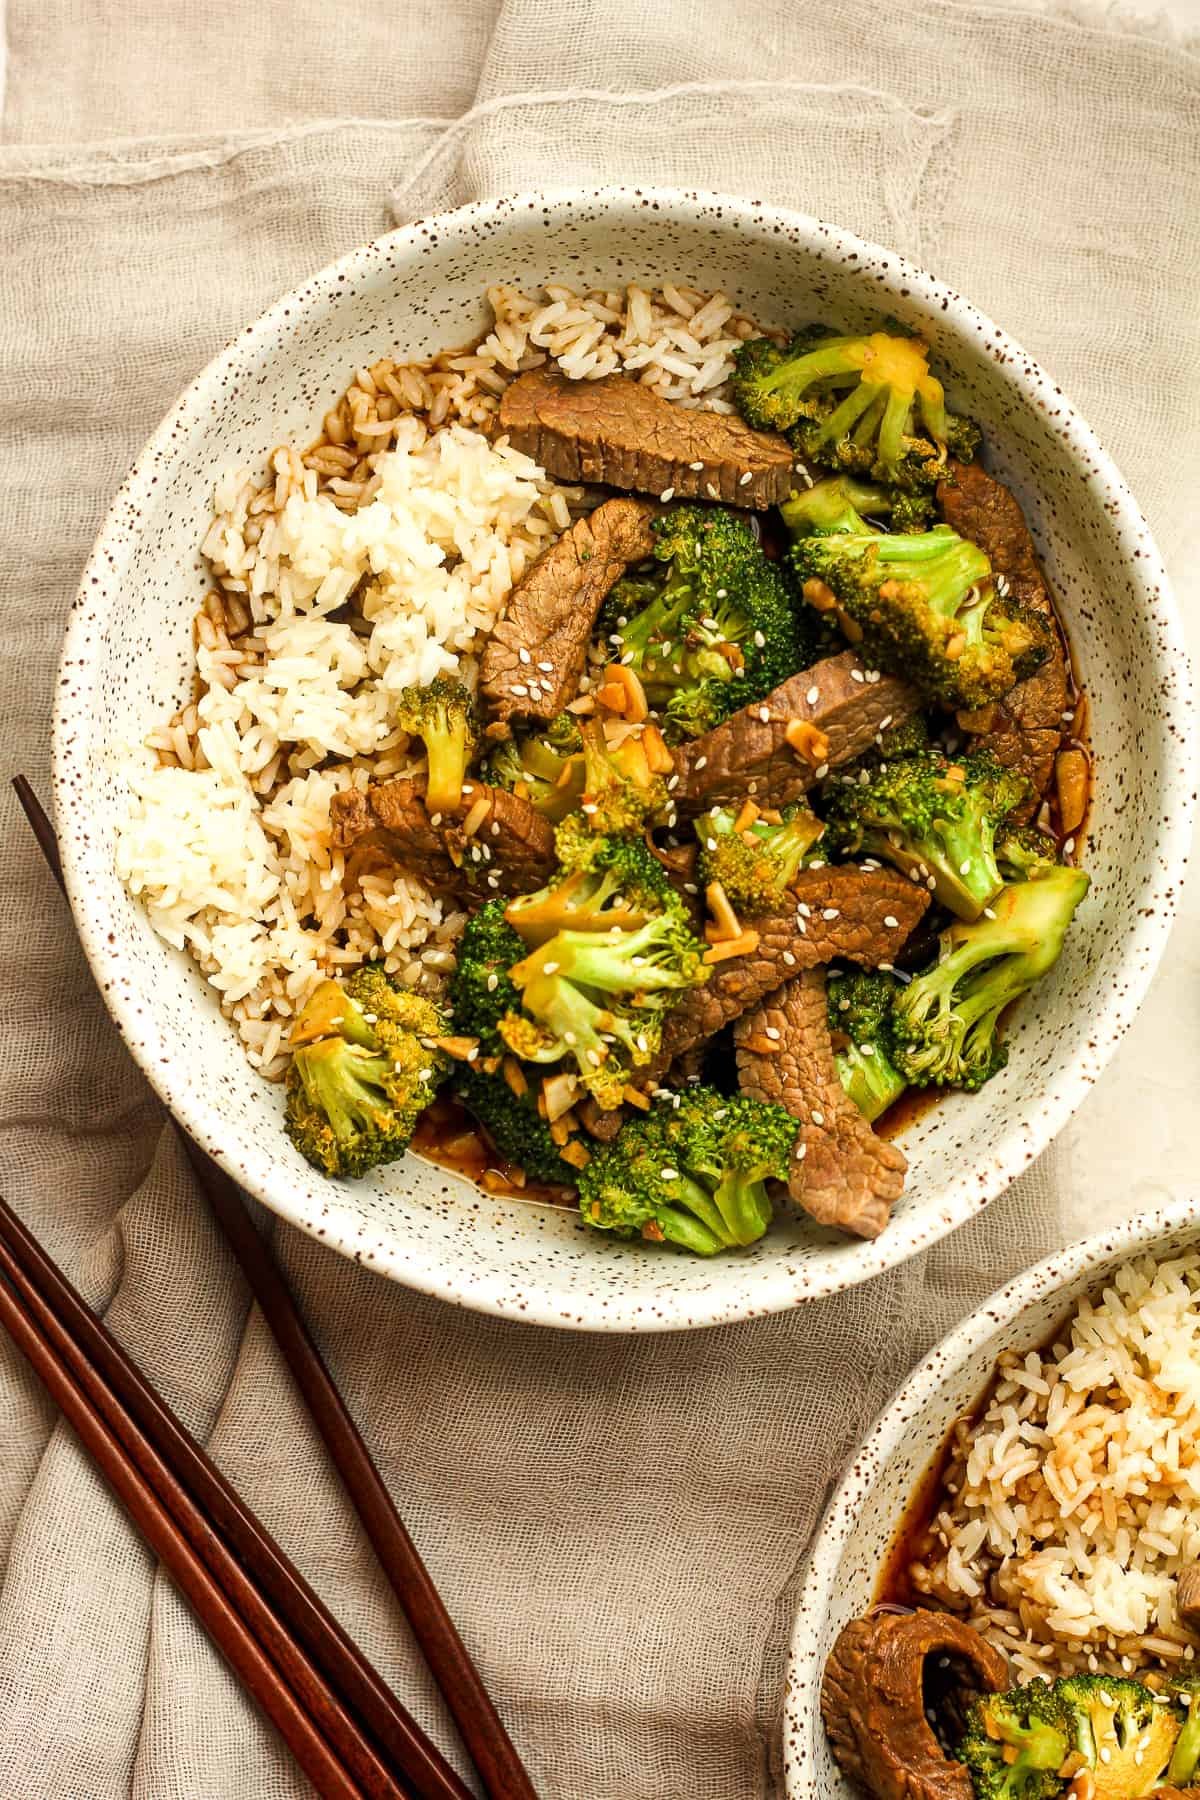 Two bowls of beef and broccoli stir fry over rice.